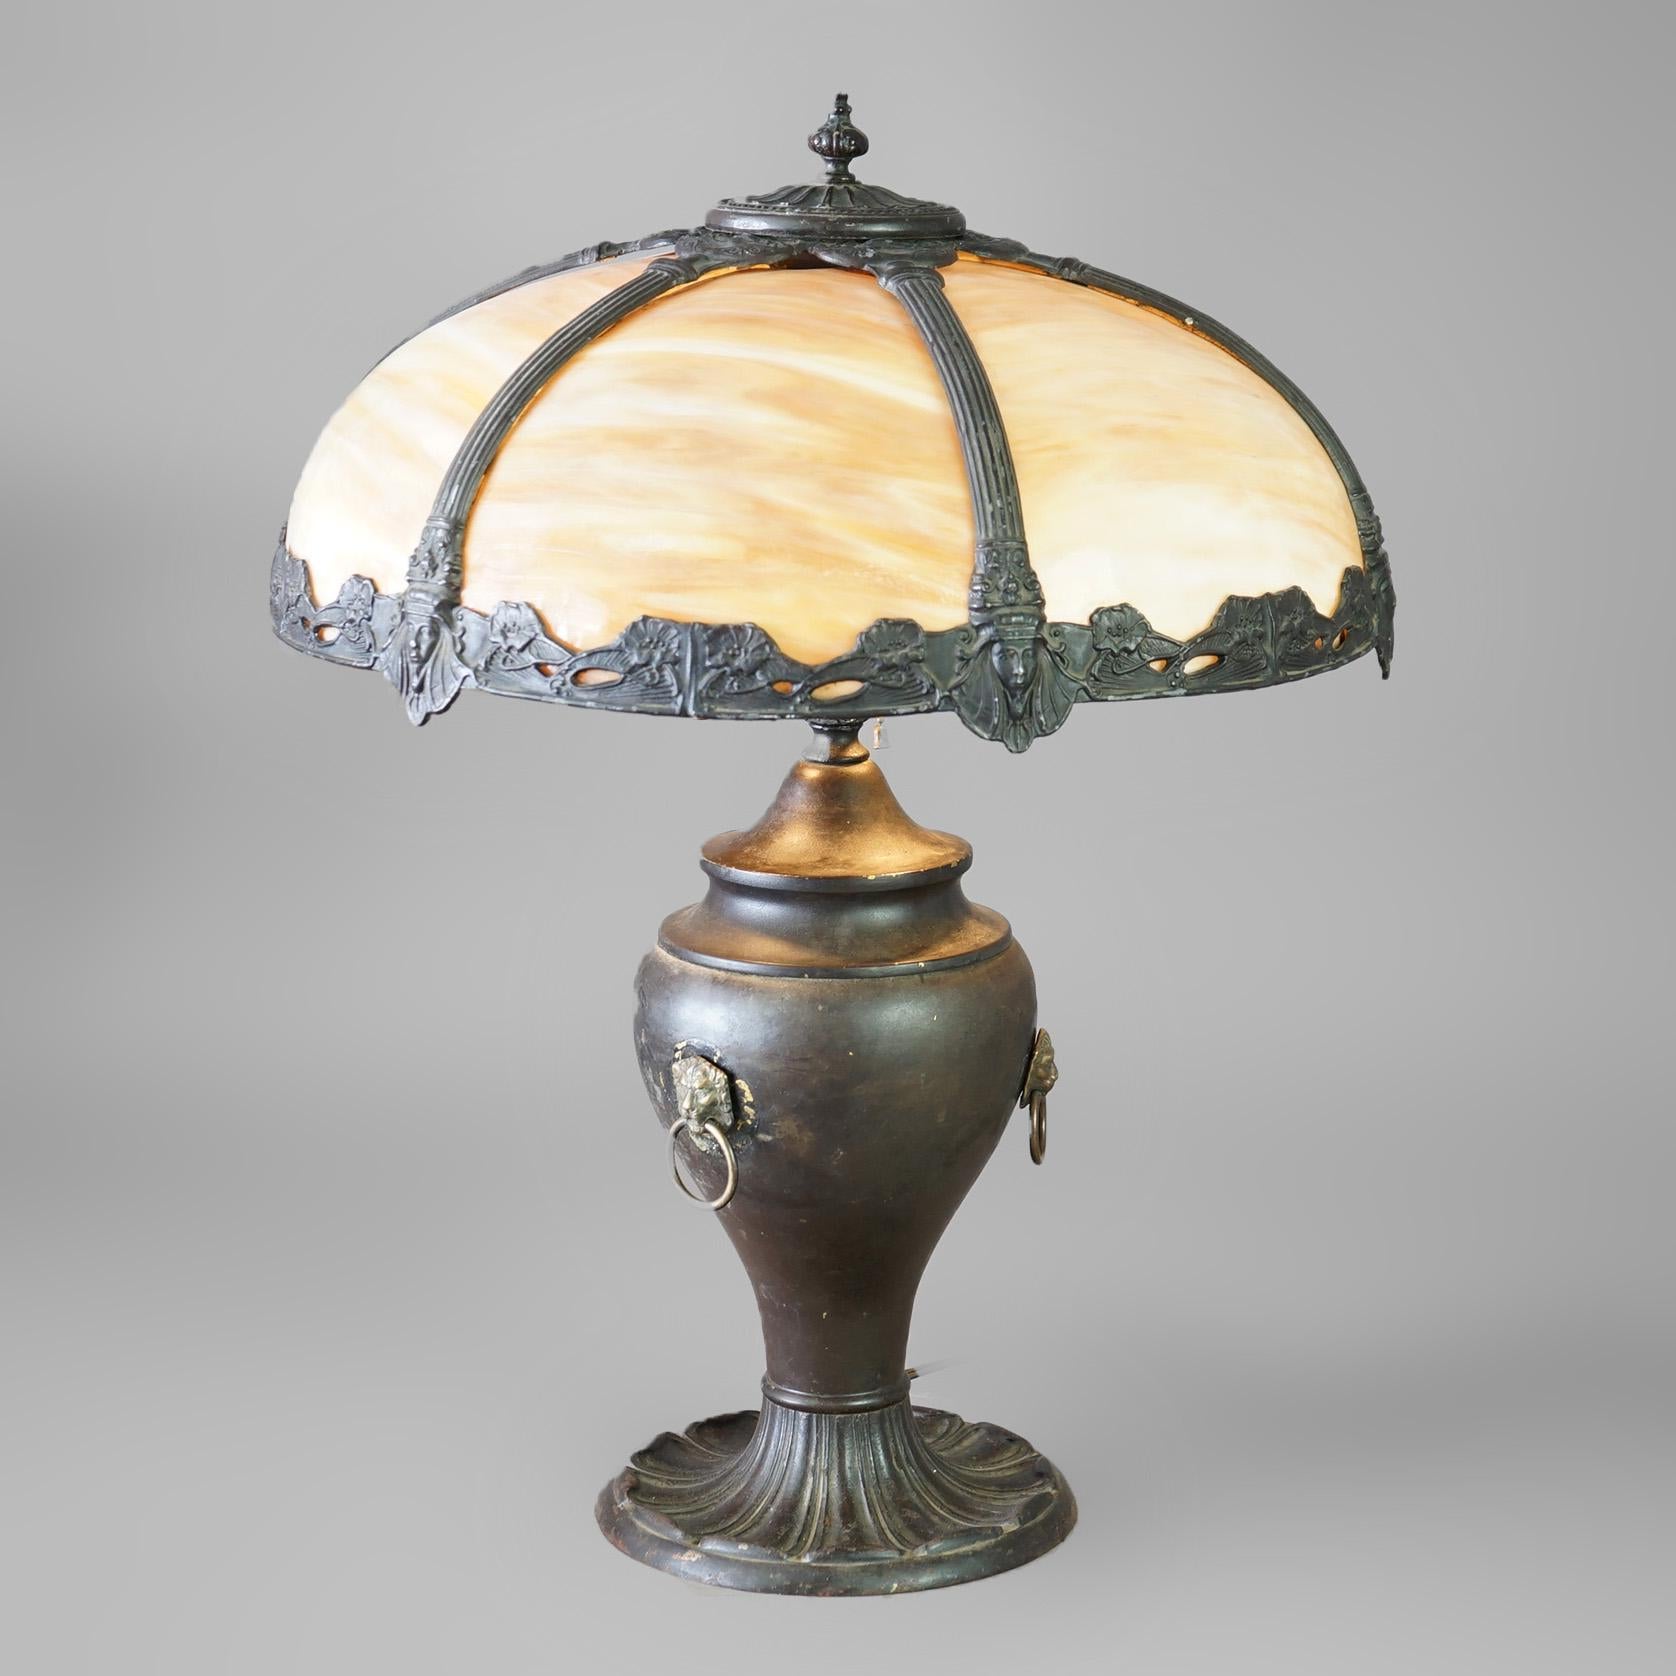 An antique Arts and Crafts table lamp in the manner of Bradley and Hubbard offers dome form shade with cast metal frame having foliate and Egyptian mask elements and housing curved slag glass panels; over cast urn form base with figural handles,